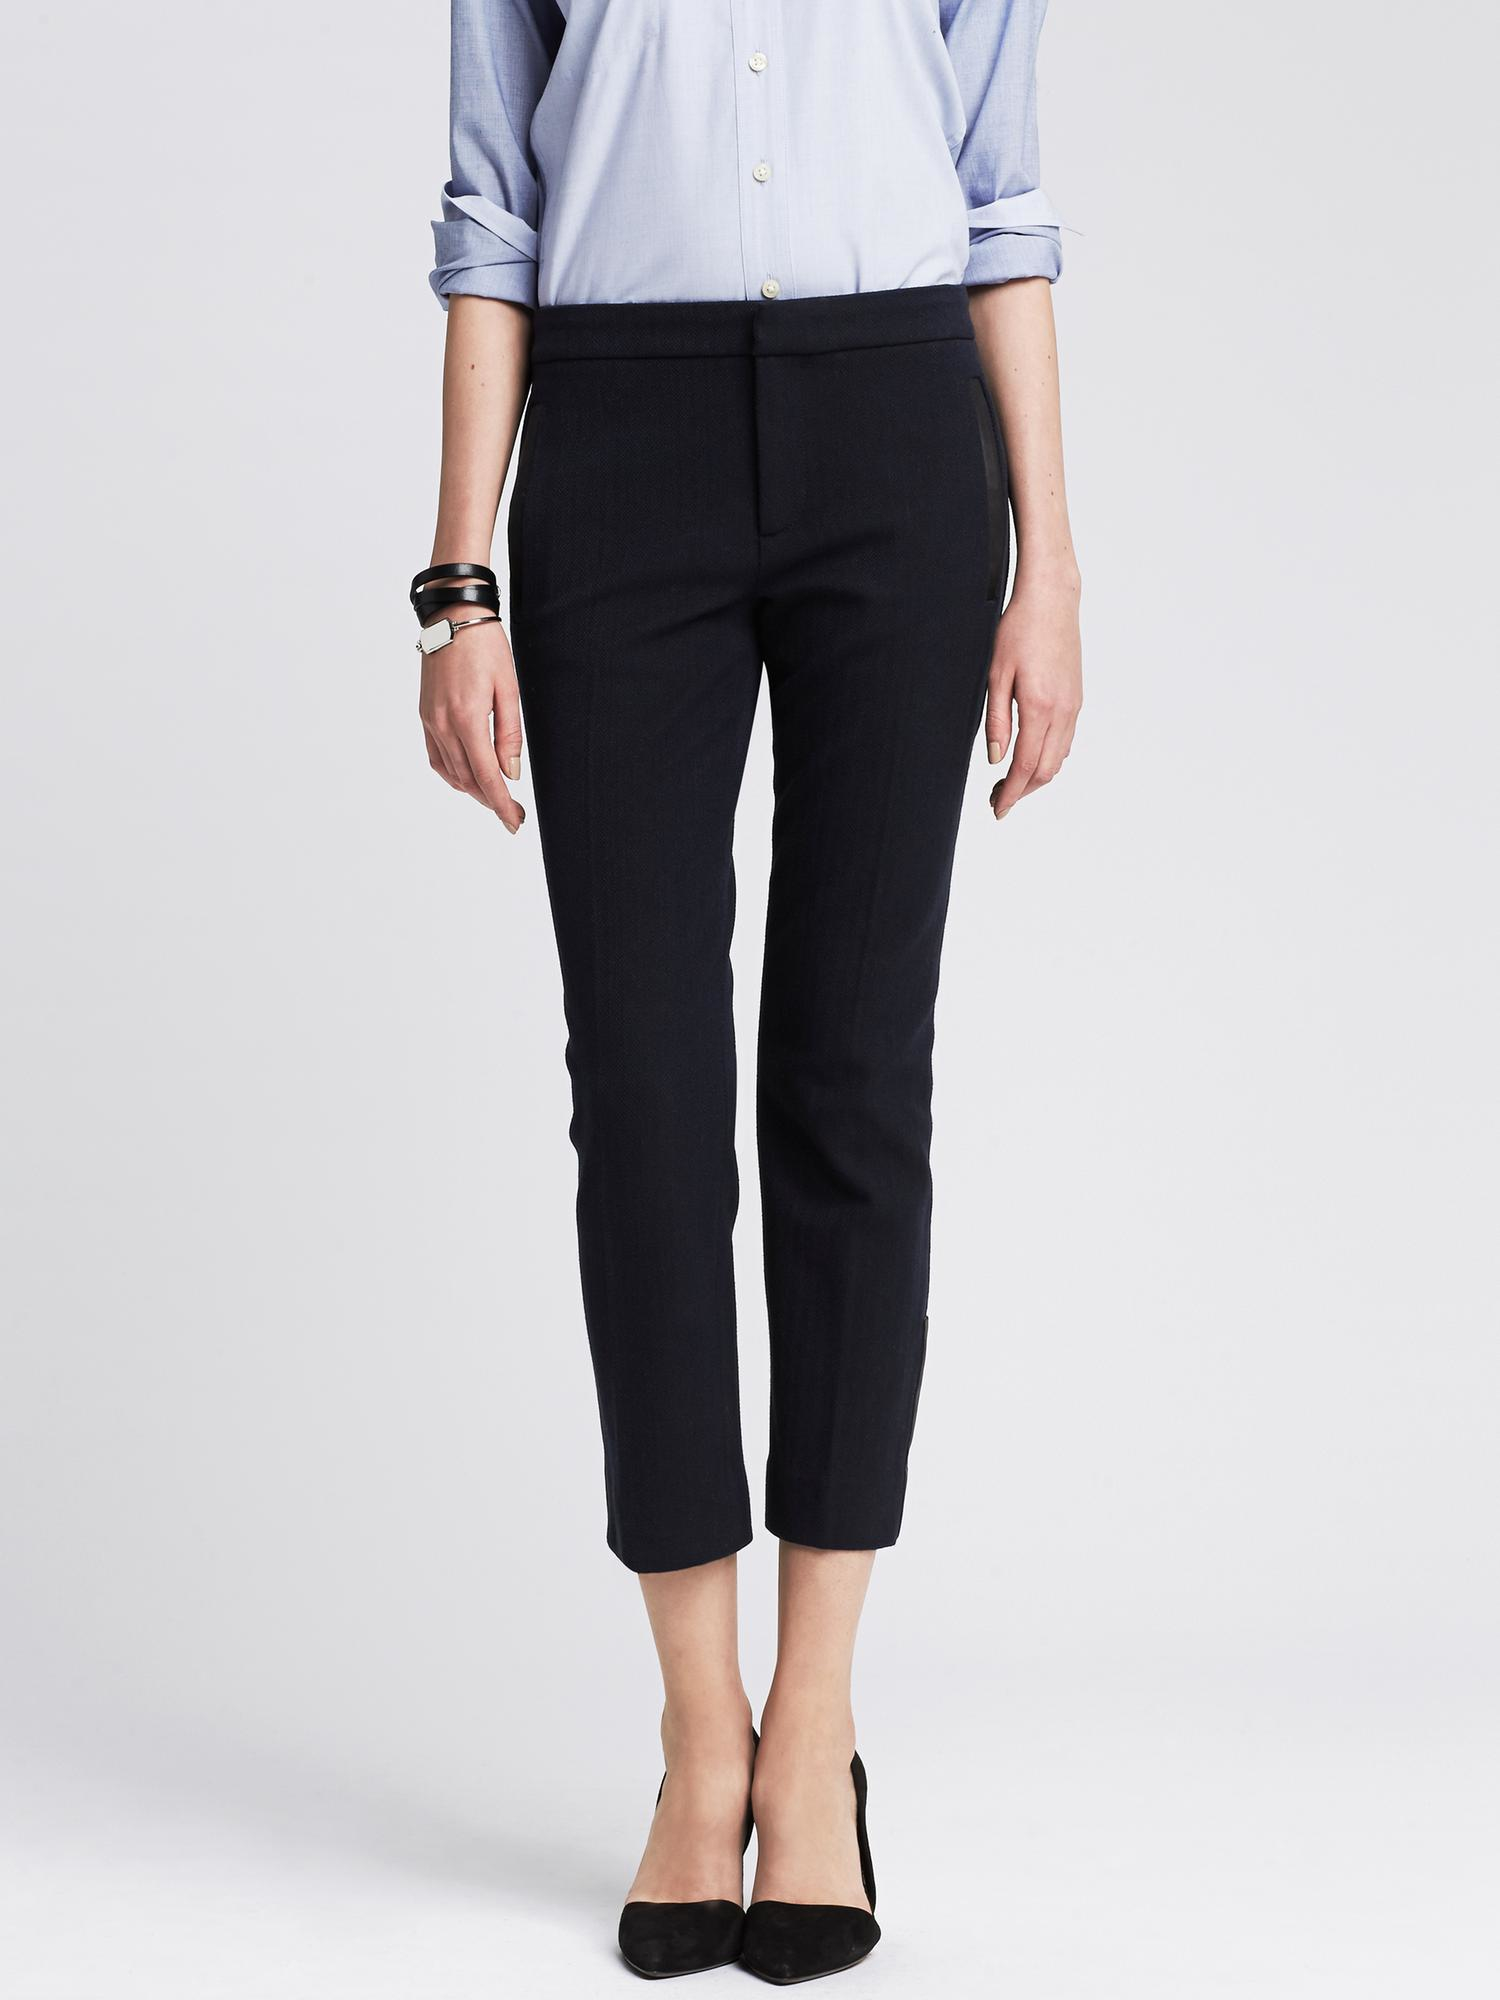 Lyst - Banana Republic Sloan-fit Faux-leather Trim Ankle Pant in Blue